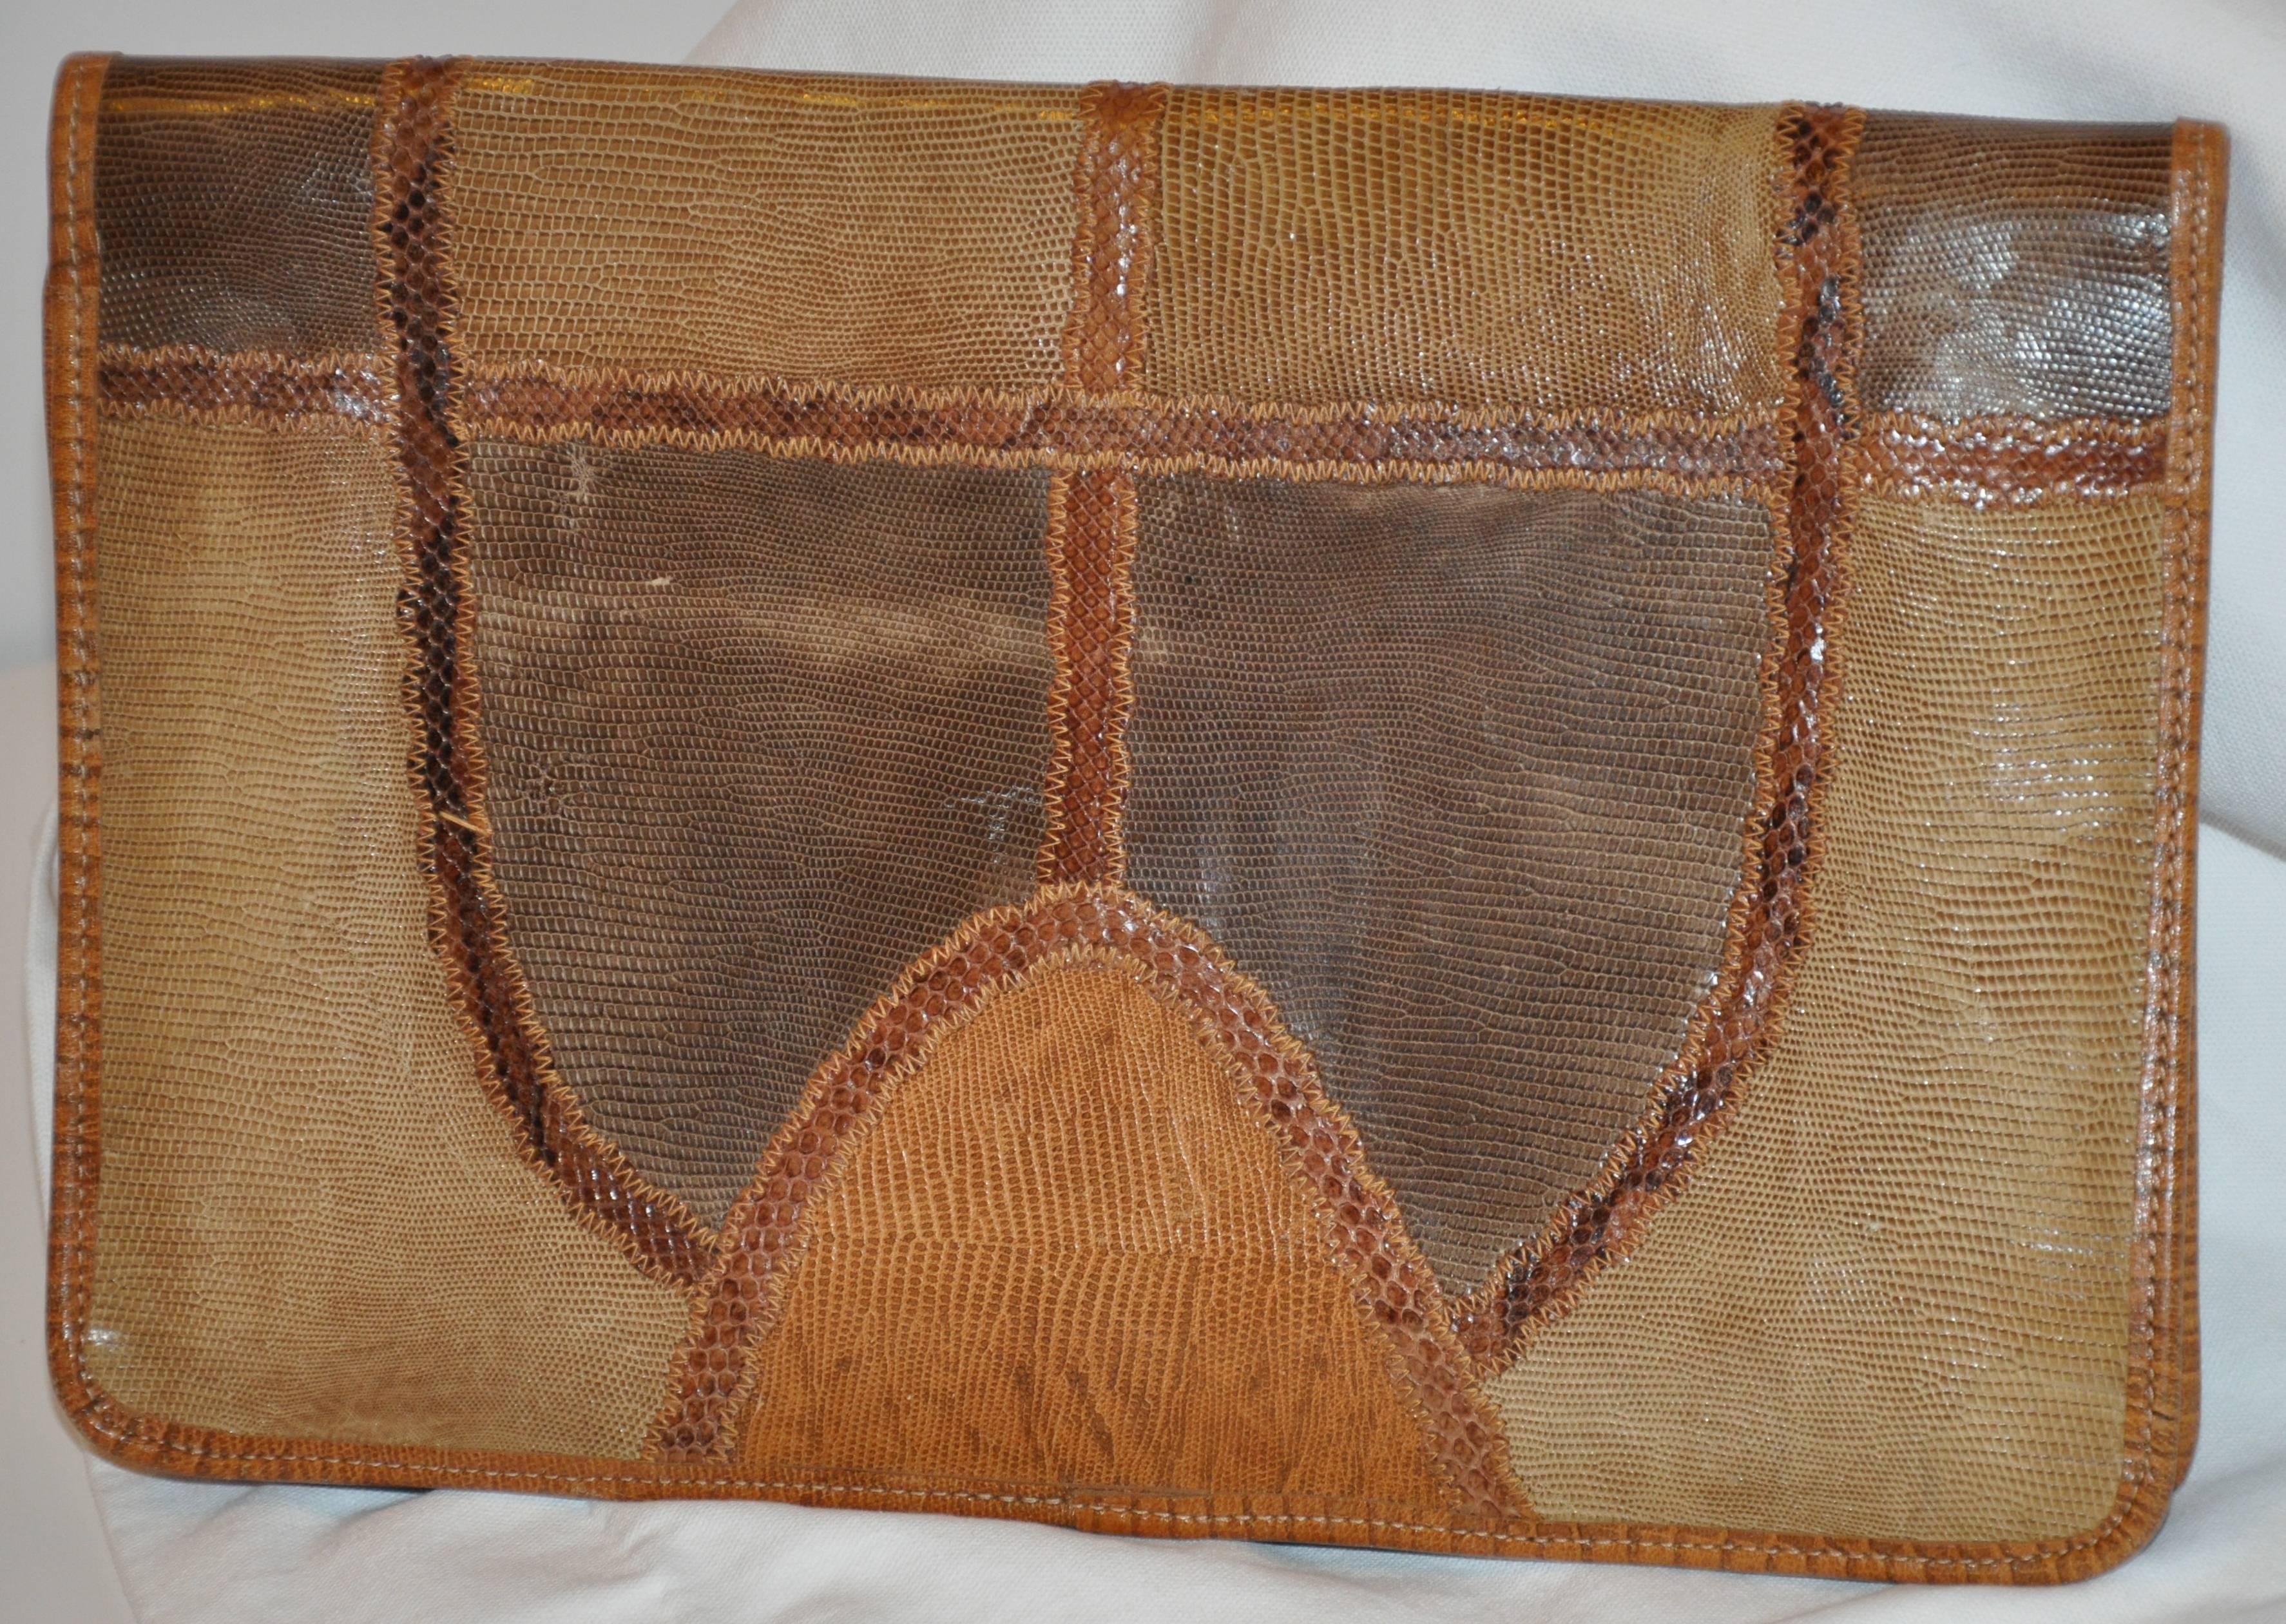        Carlos Falchi Signature multi "shades of browns" multi skins such as snake and lizard makes for a wonderful clutch. The sides are finished with embossed calfskin for better wear and durably well as all finished edges. Top stitching